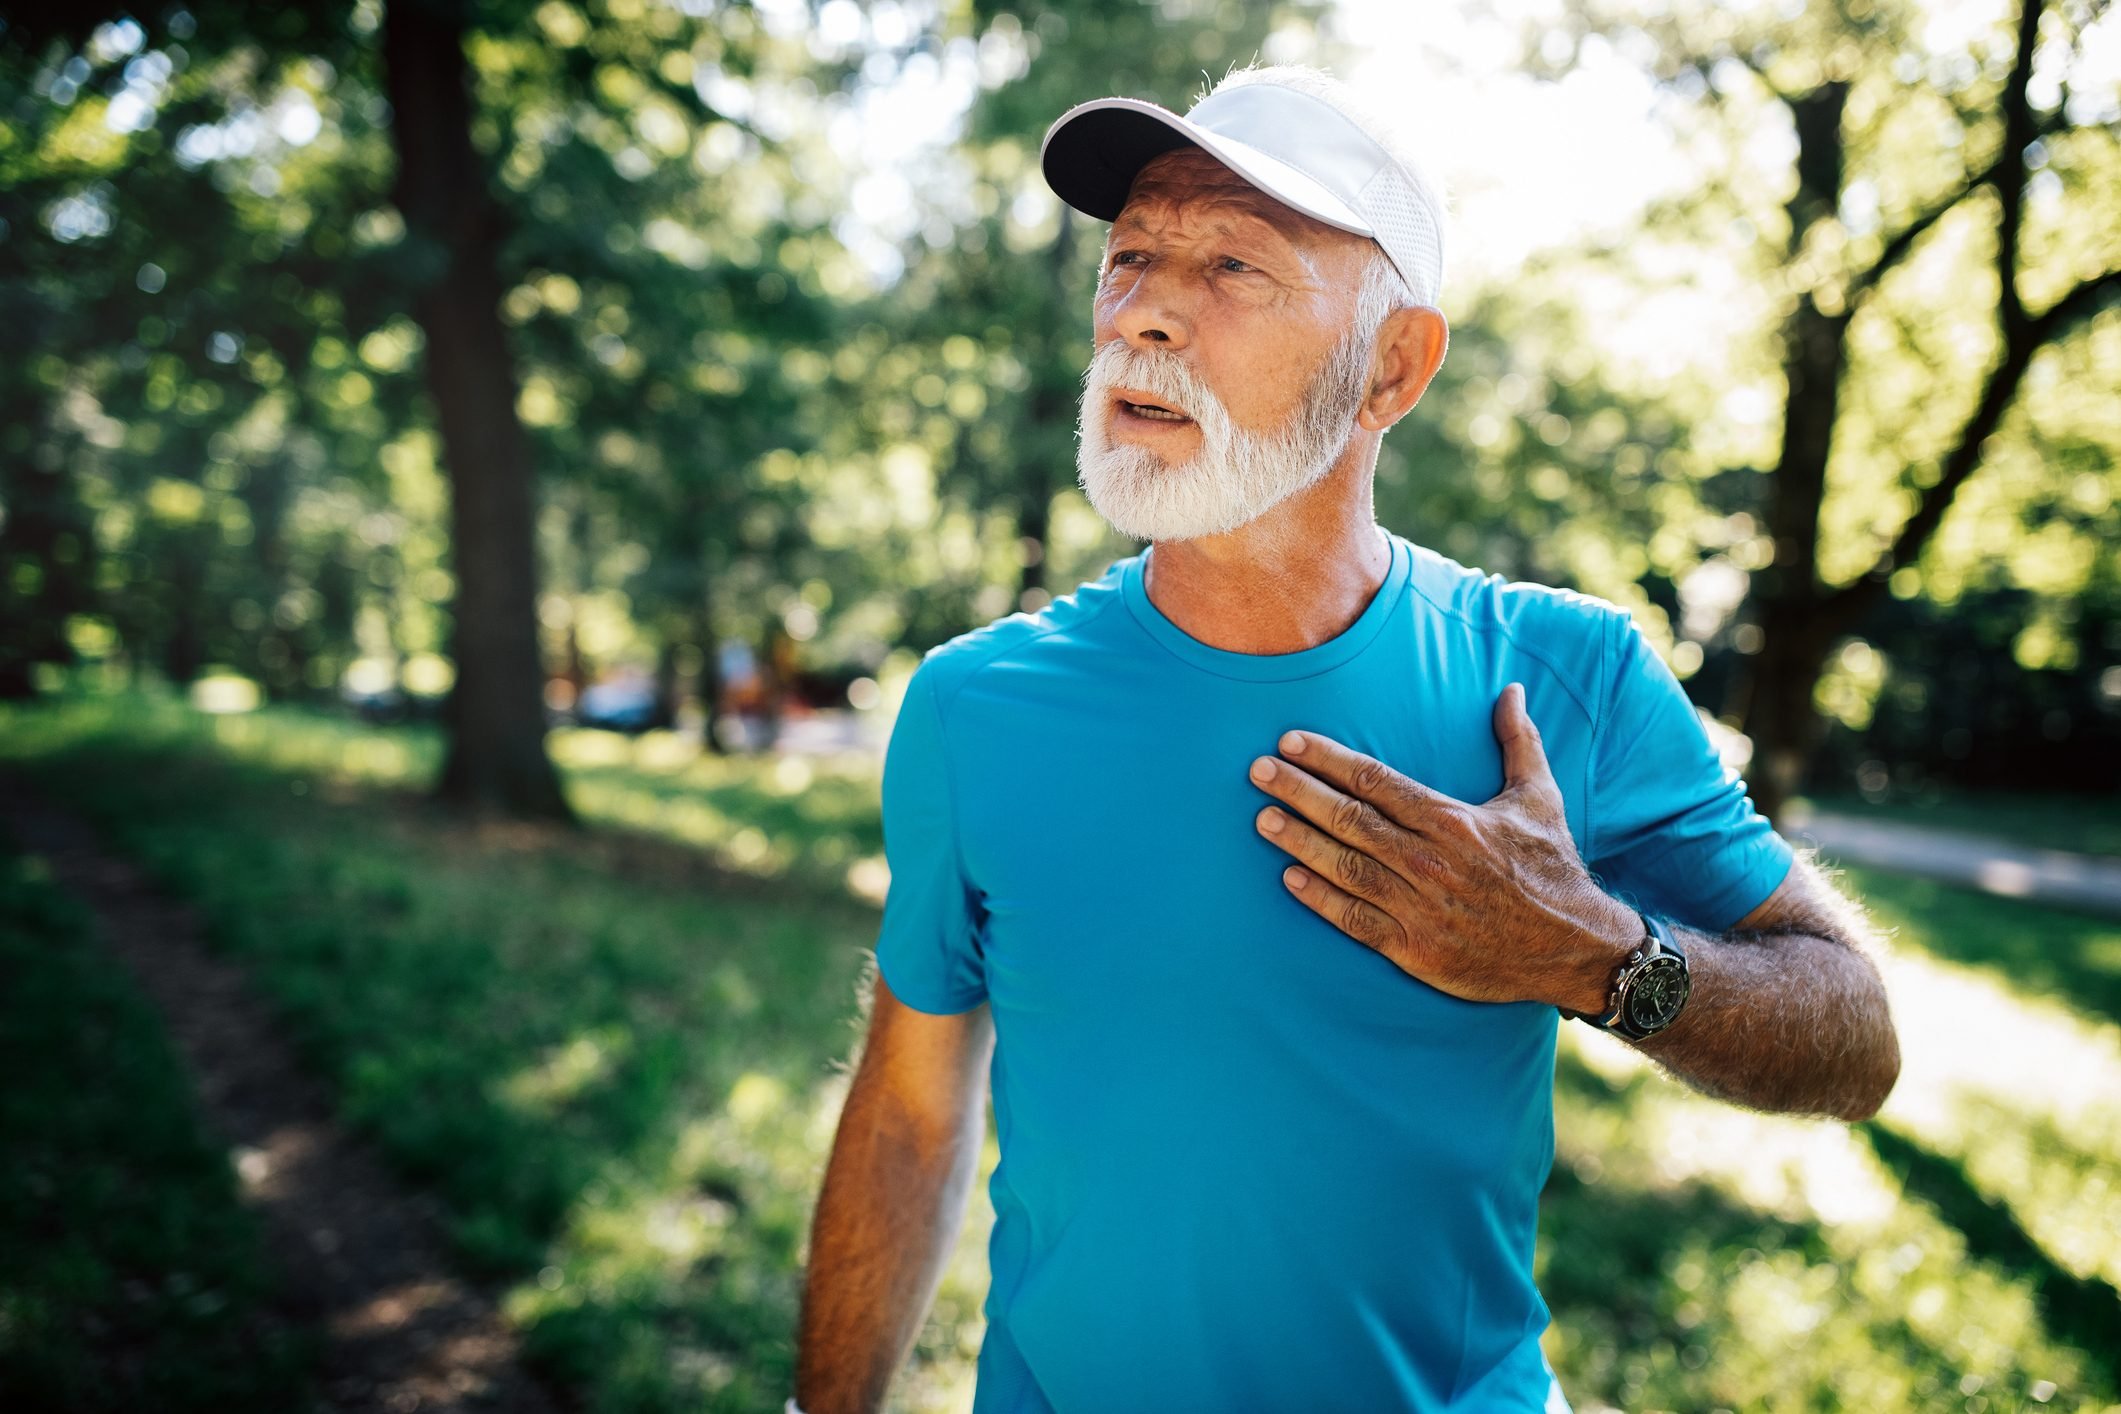 8 Causes of Exercise-Related Chest Pain Besides a Heart Attack